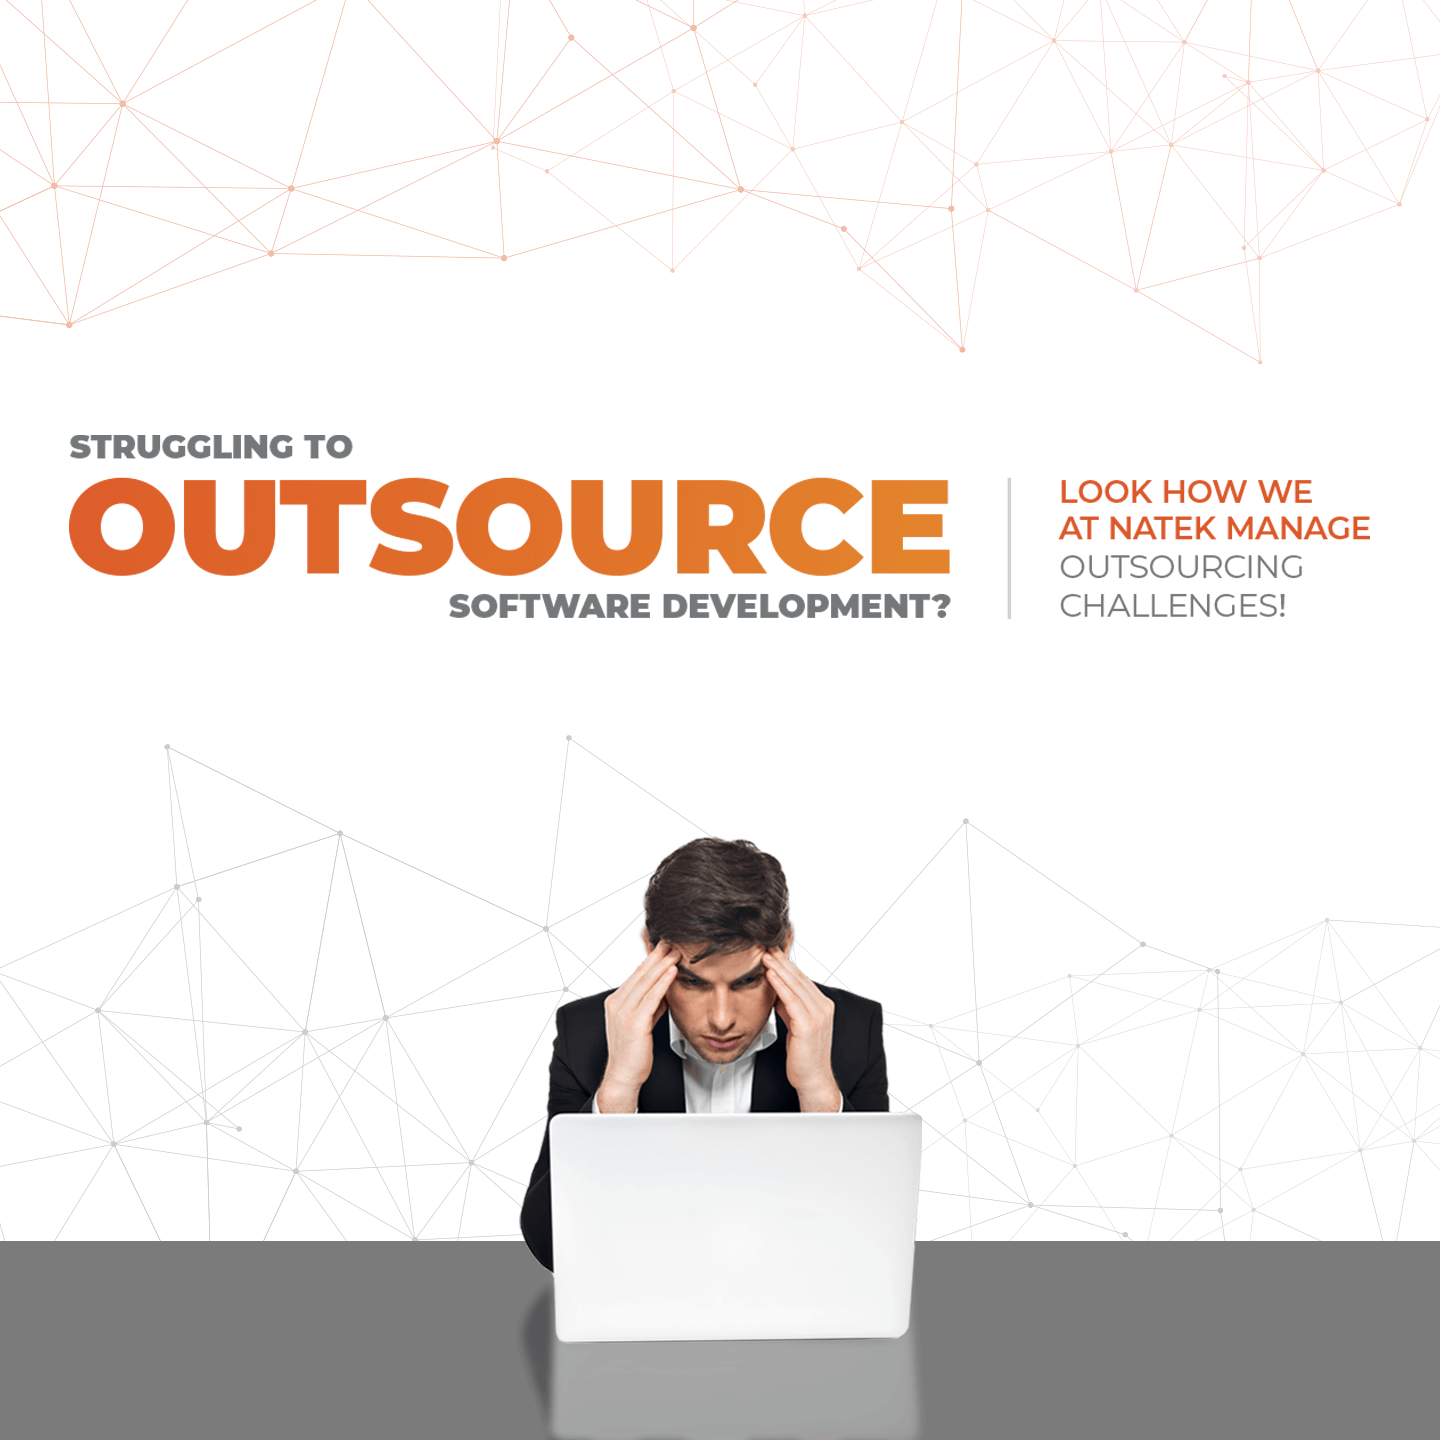 Challenges of IT outsourcing - manage them with NATEK